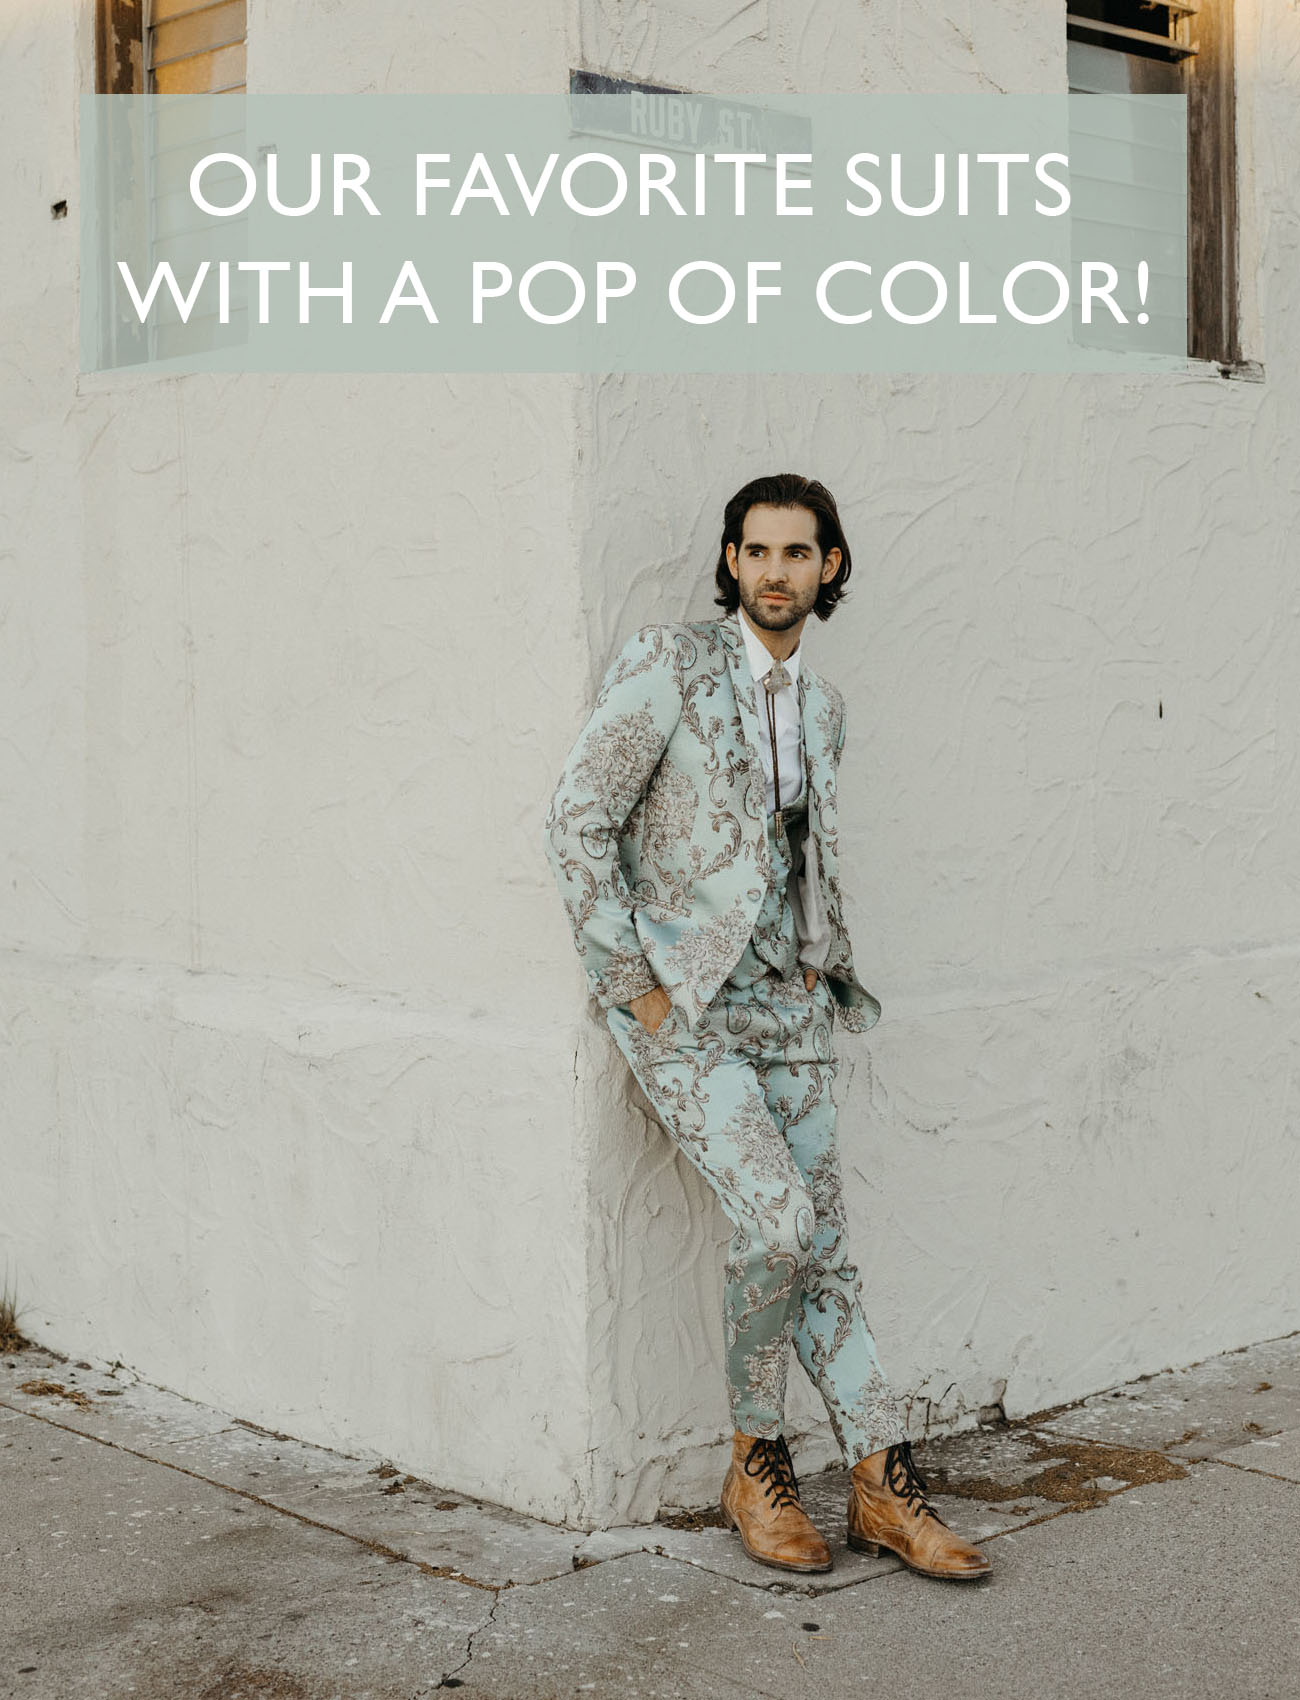 Get-Ups for the Groom: Our Favorite Suits with a Pop of Color!